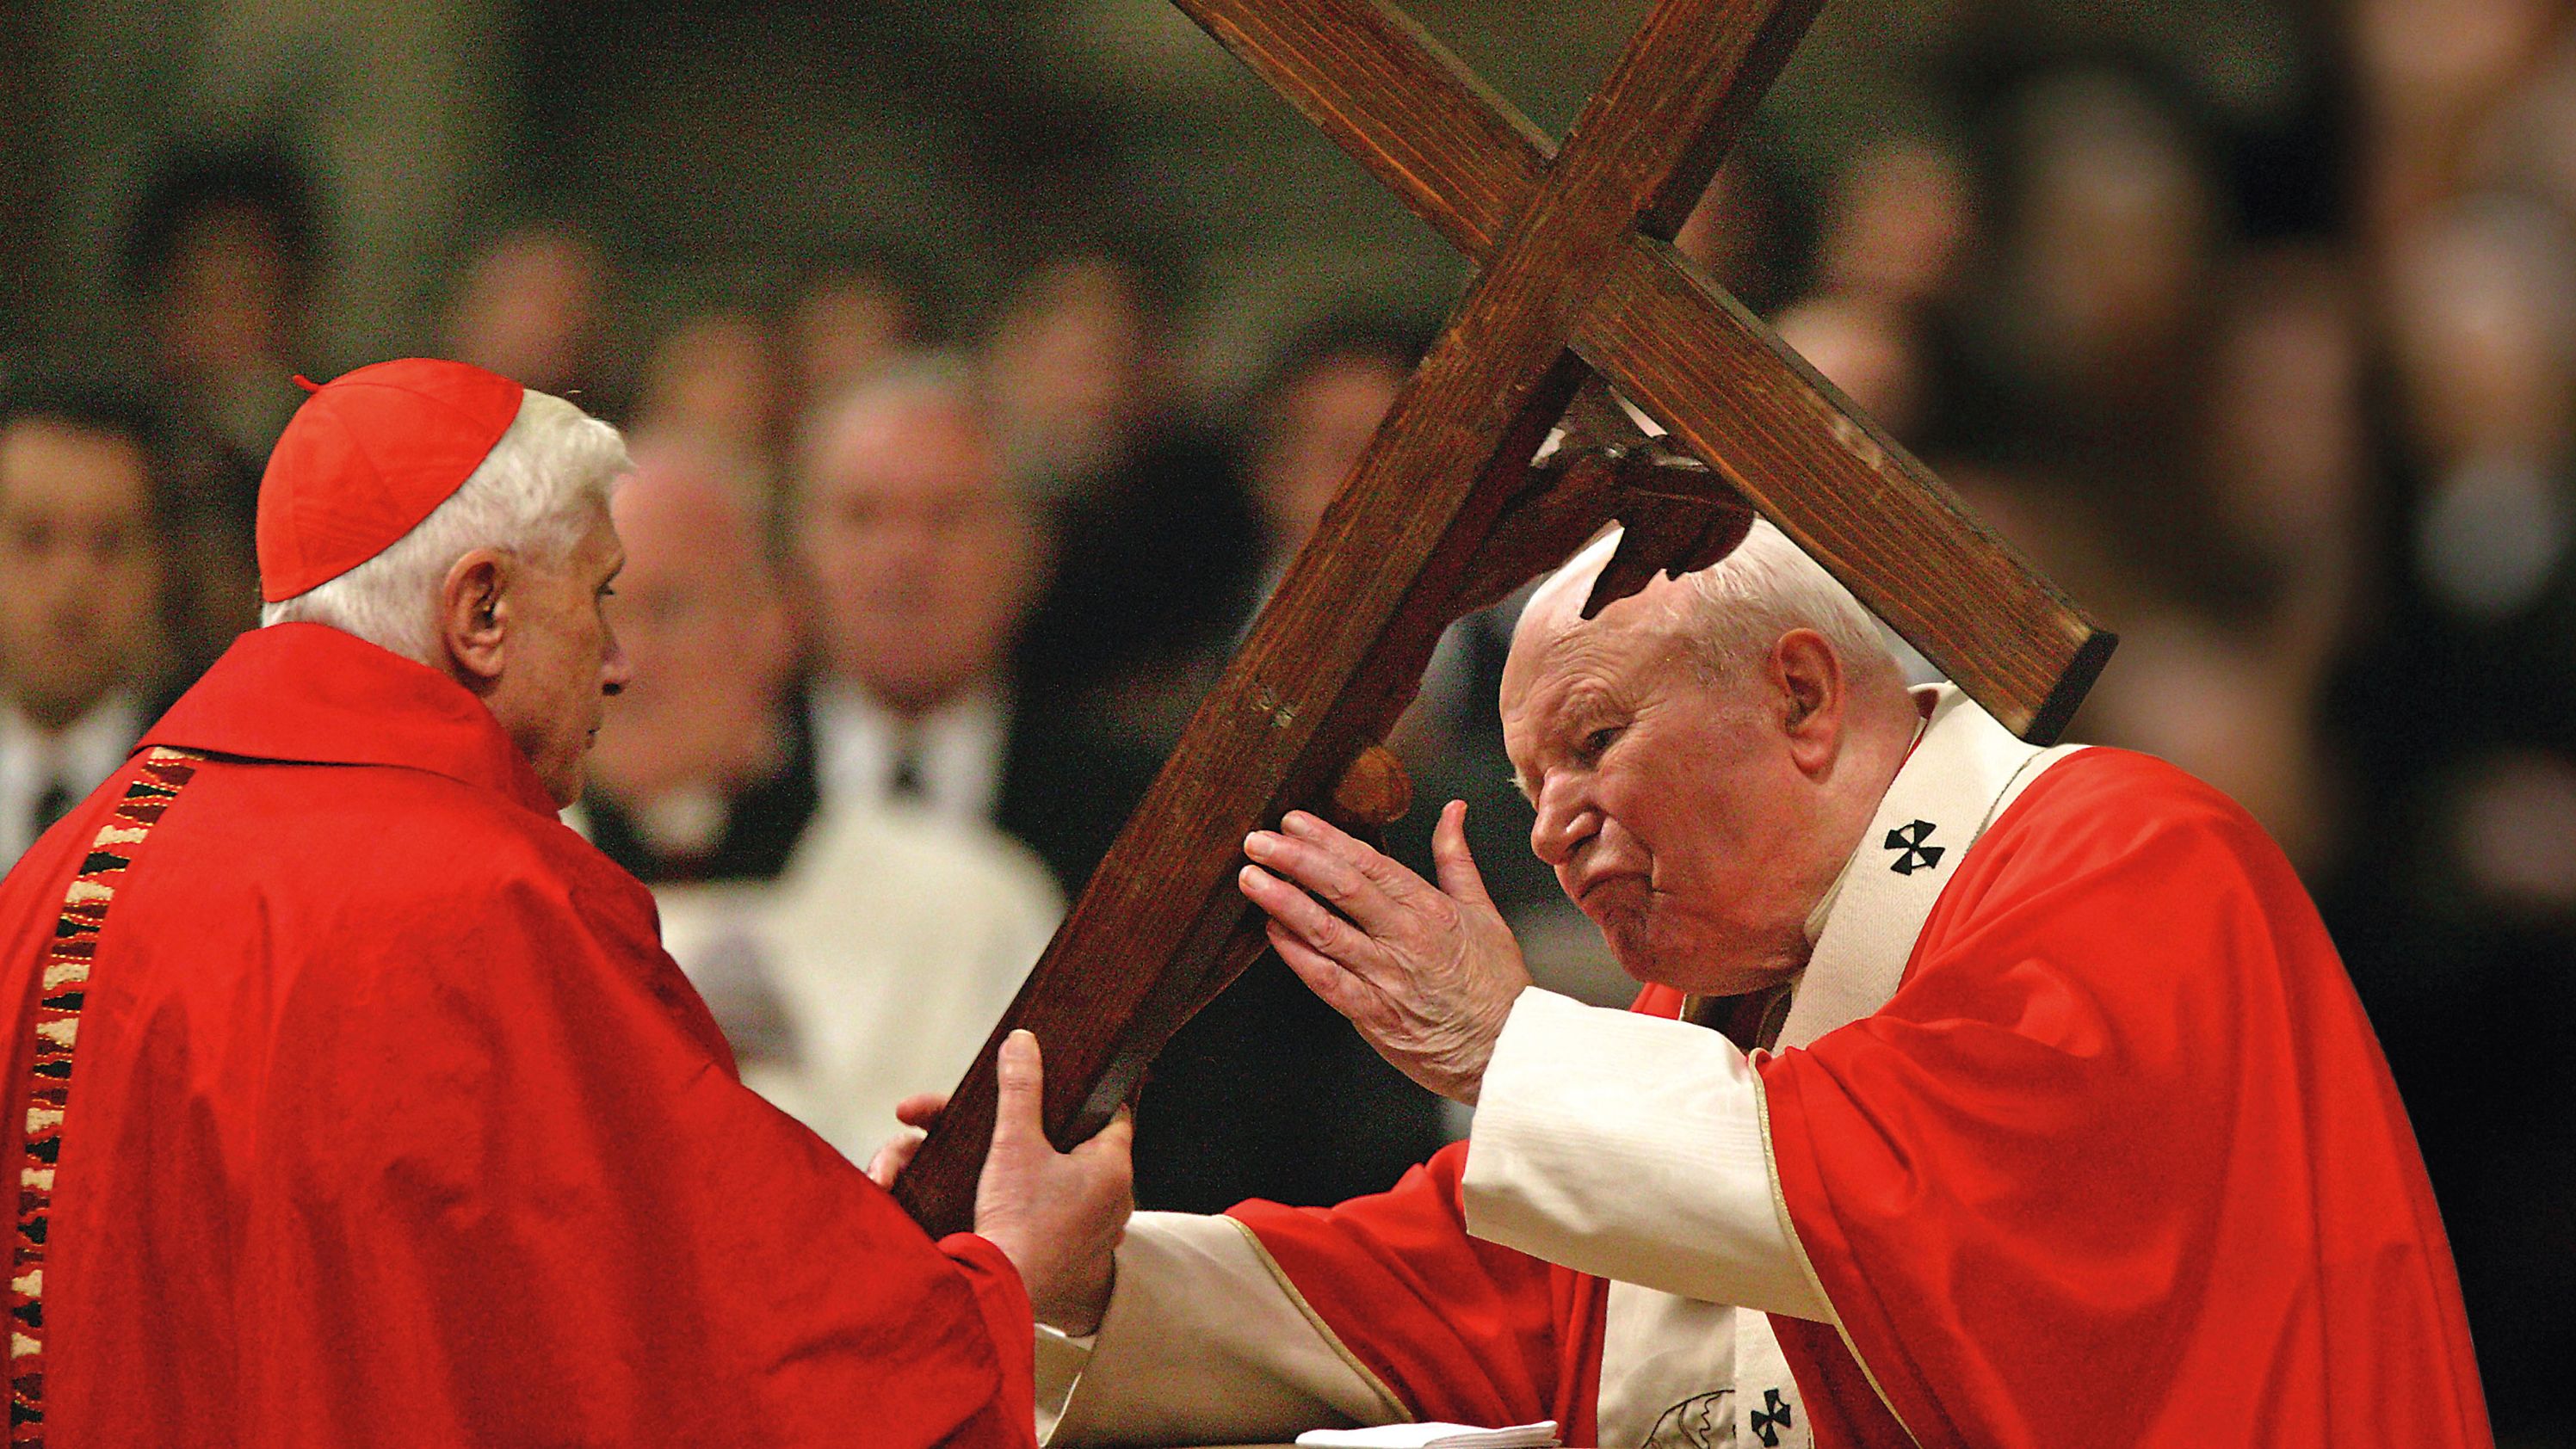 Benedict passes a cross to Pope John Paul II during a Passion of Christ celebration at the Vatican in the 2000s.